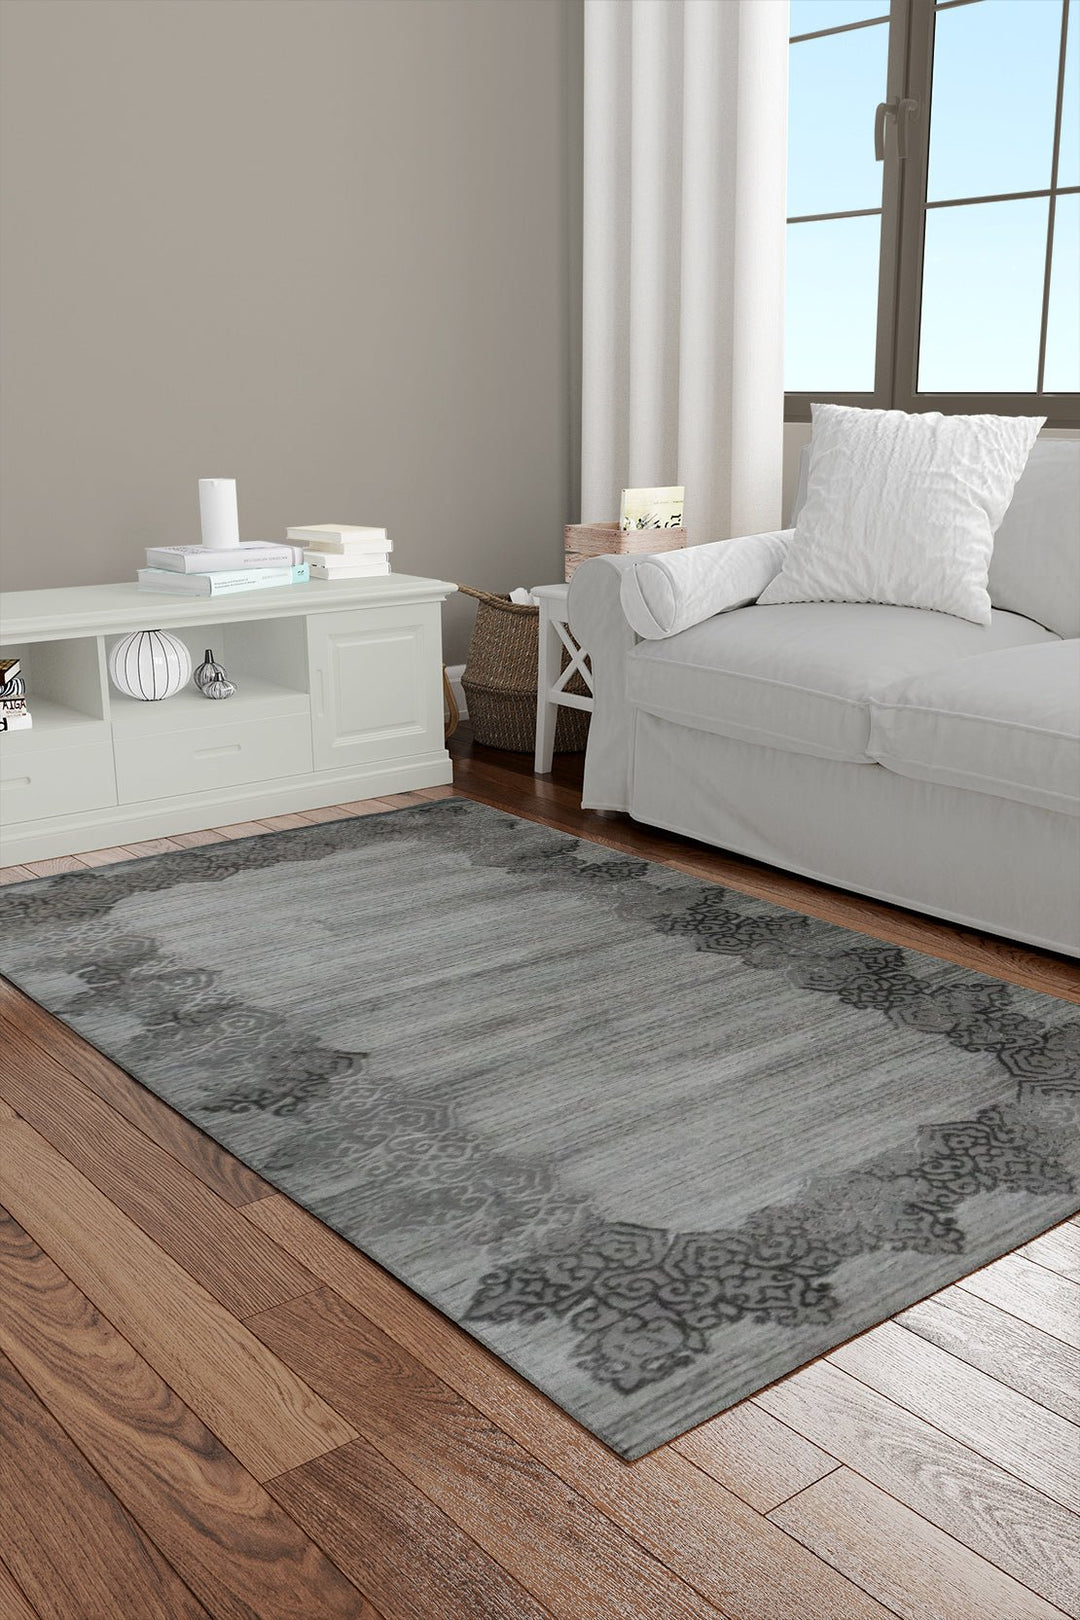 Turkish Modern Festival 1 Rug - 3.2 x 6.5 FT - Gray - Superior Comfort, Modern Style Accent Rugs - V Surfaces